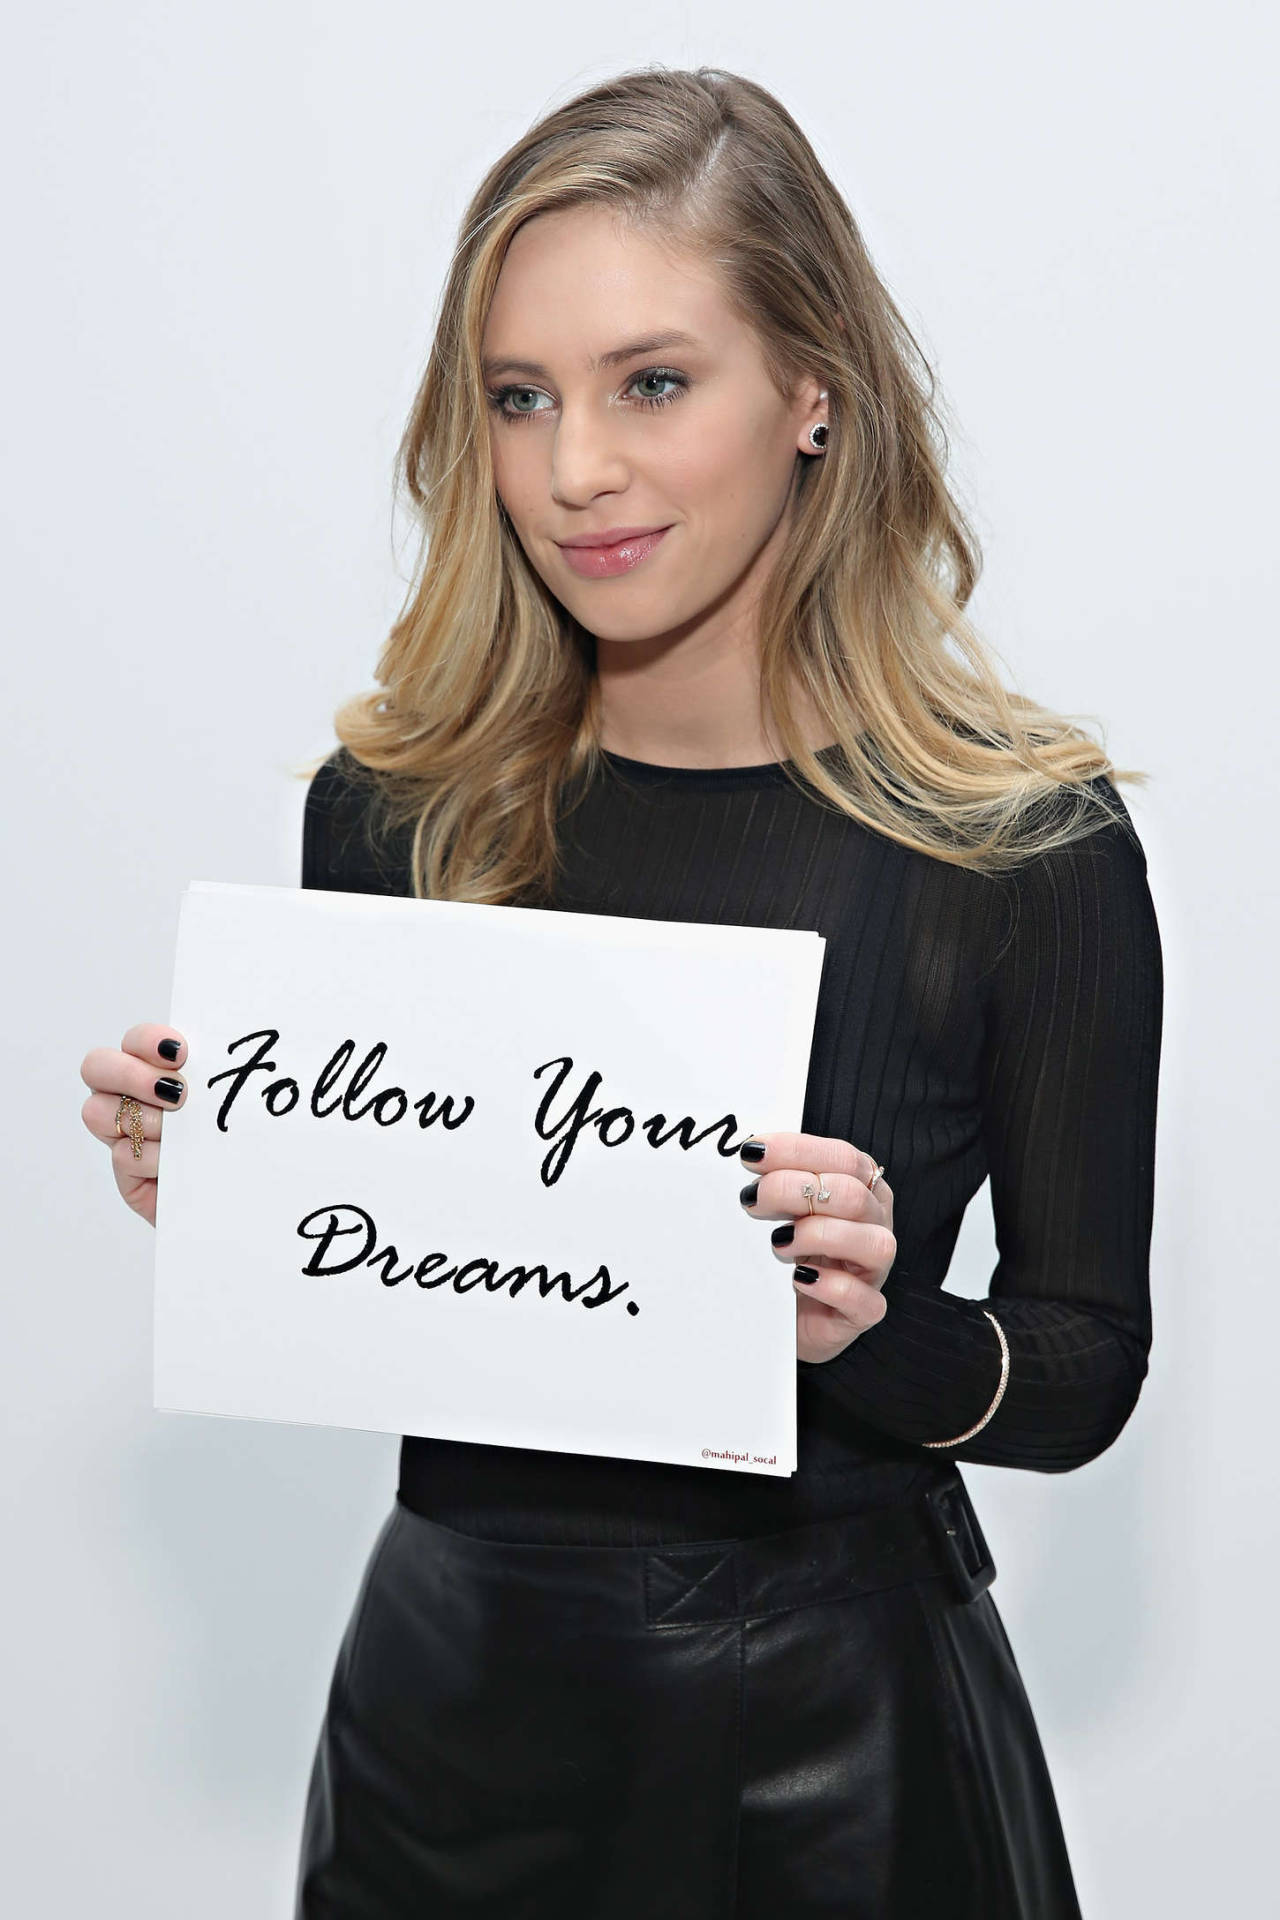 Dylan Penn. ♥  Follow your dreams. Oh and follow my tumblr too, because your dreams